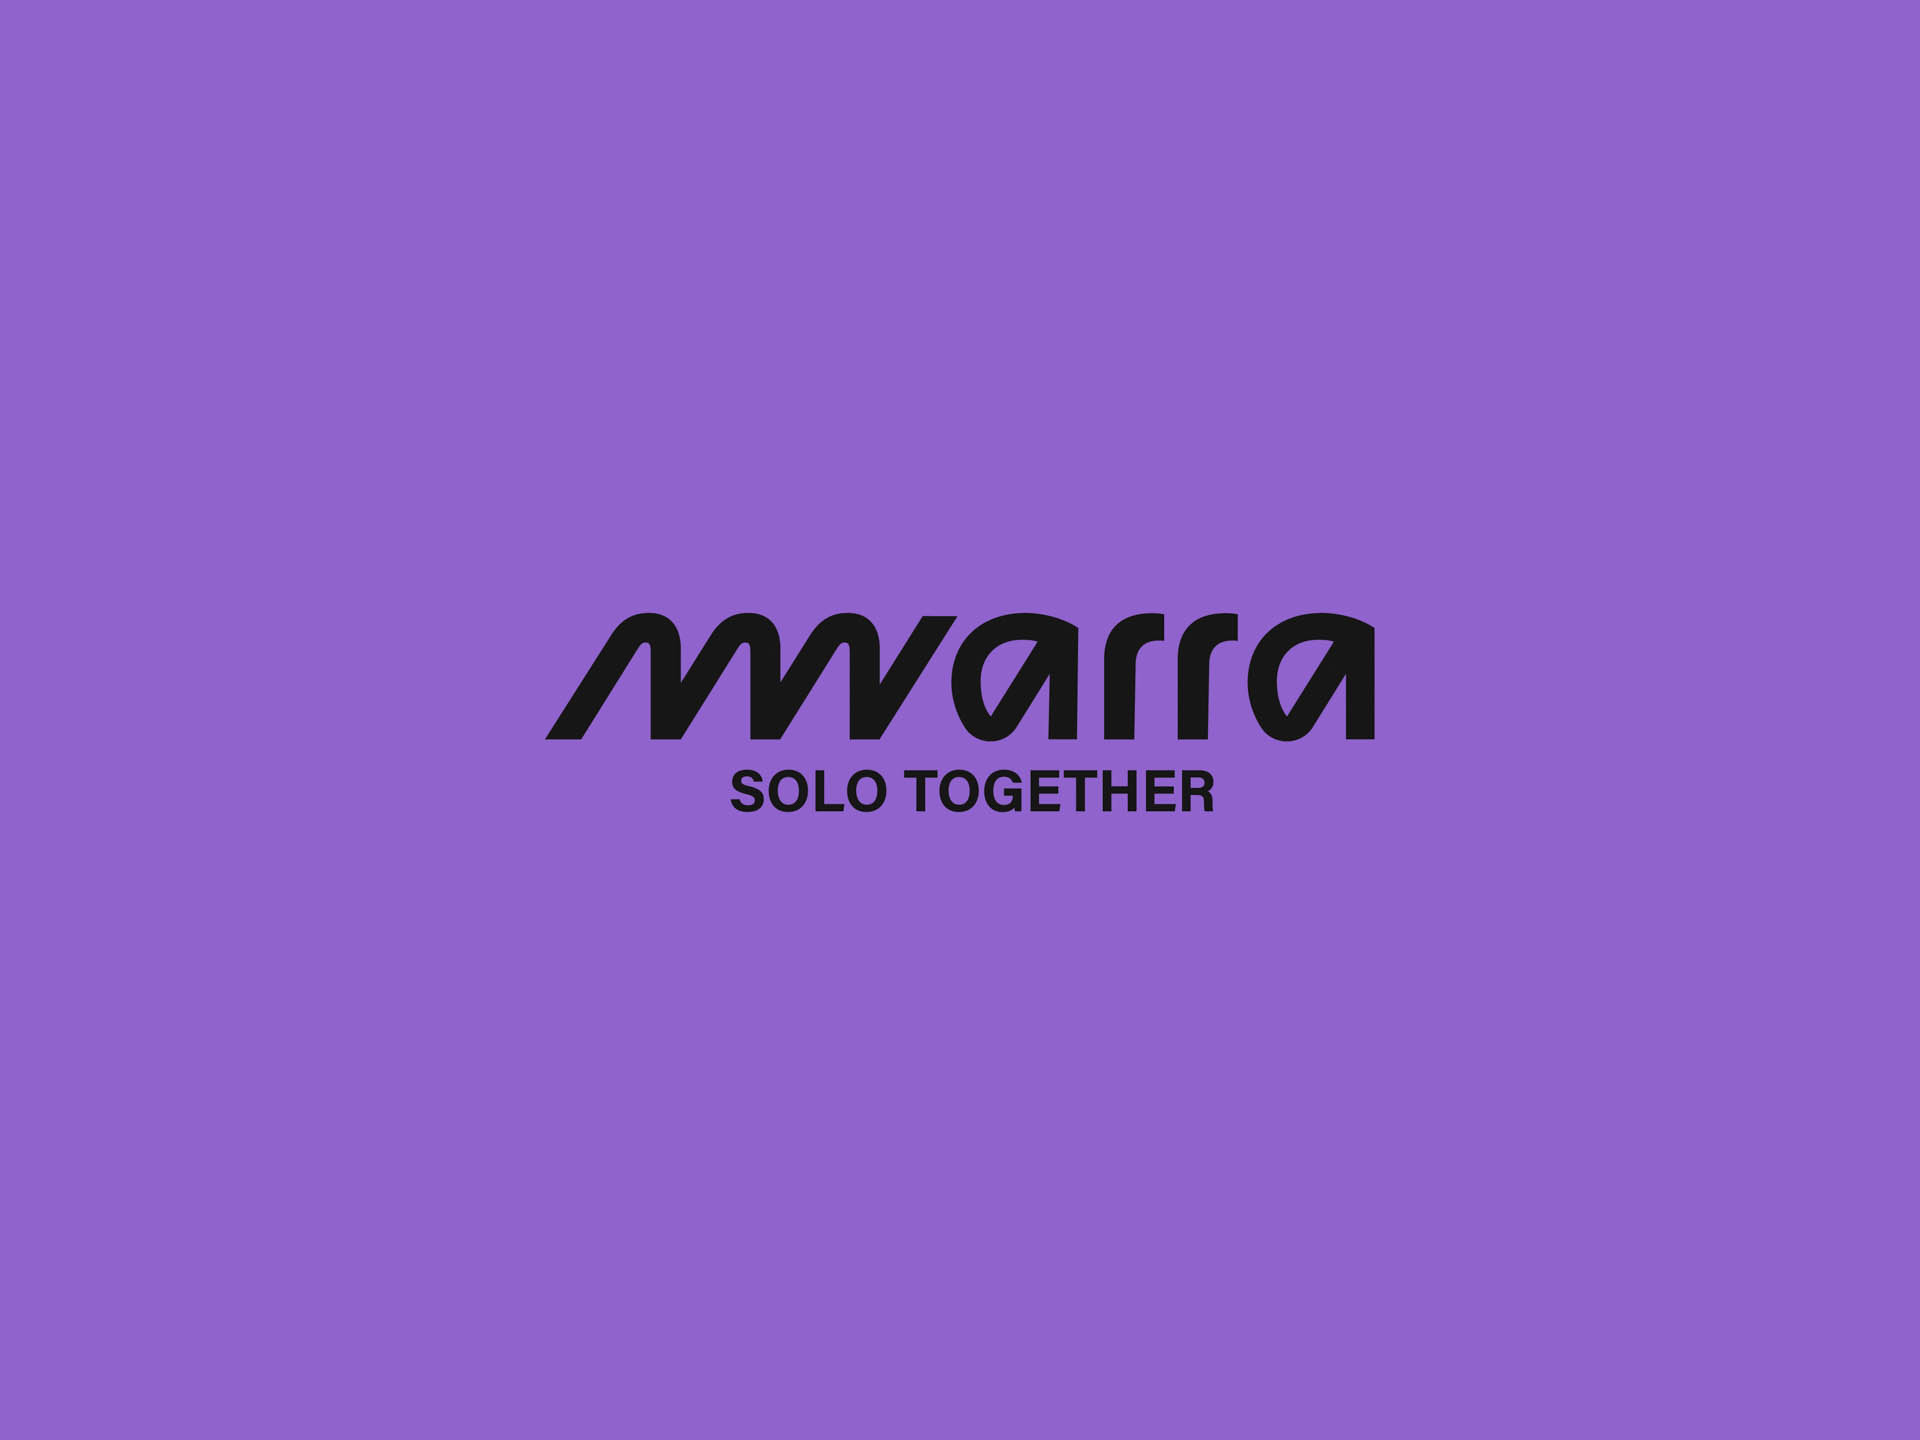 purple background with the Marra logo in black